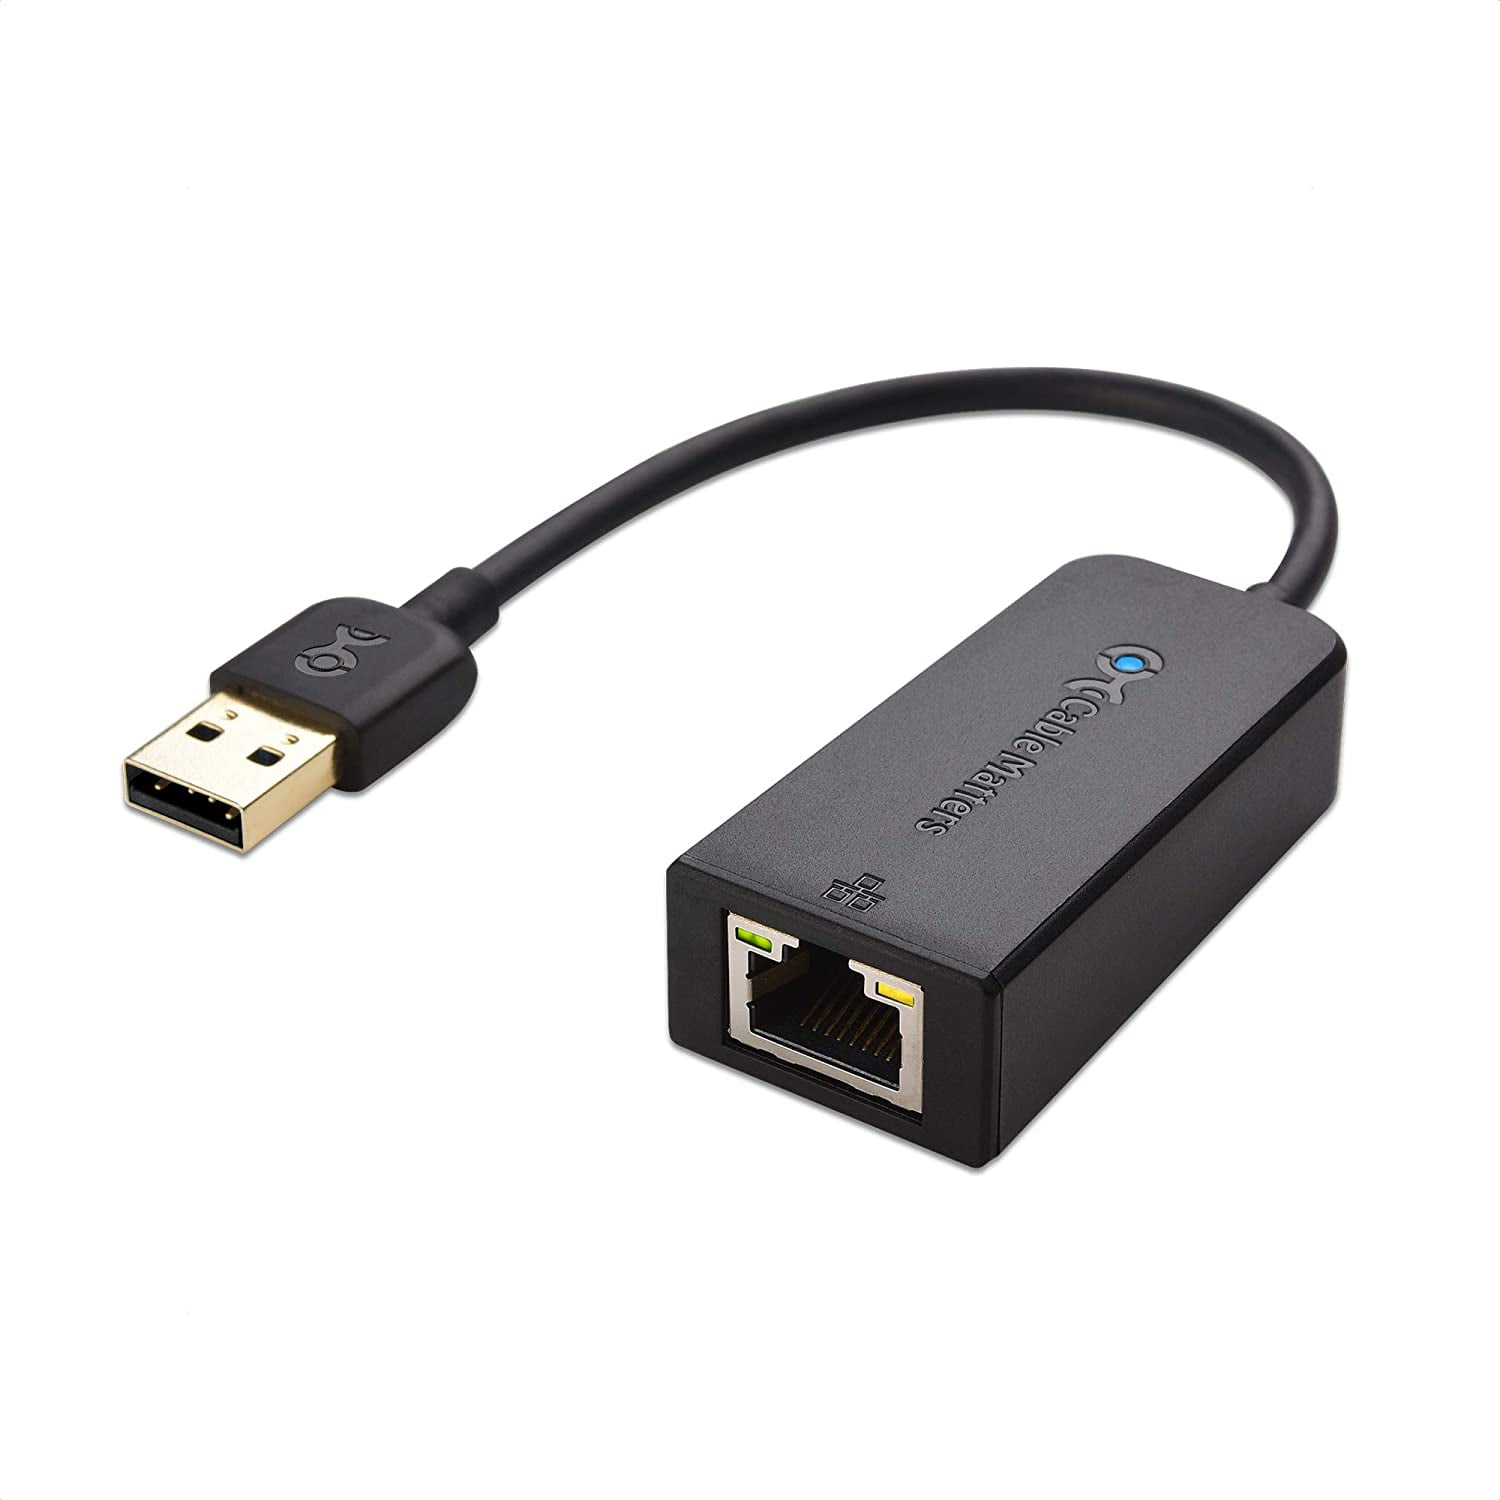 Cable Matters USB to Ethernet Adapter Cable (USB 2.0 to Ethernet USB to RJ45) Supporting 10 / 100 Mbps Ethernet Network in Black - Walmart.com